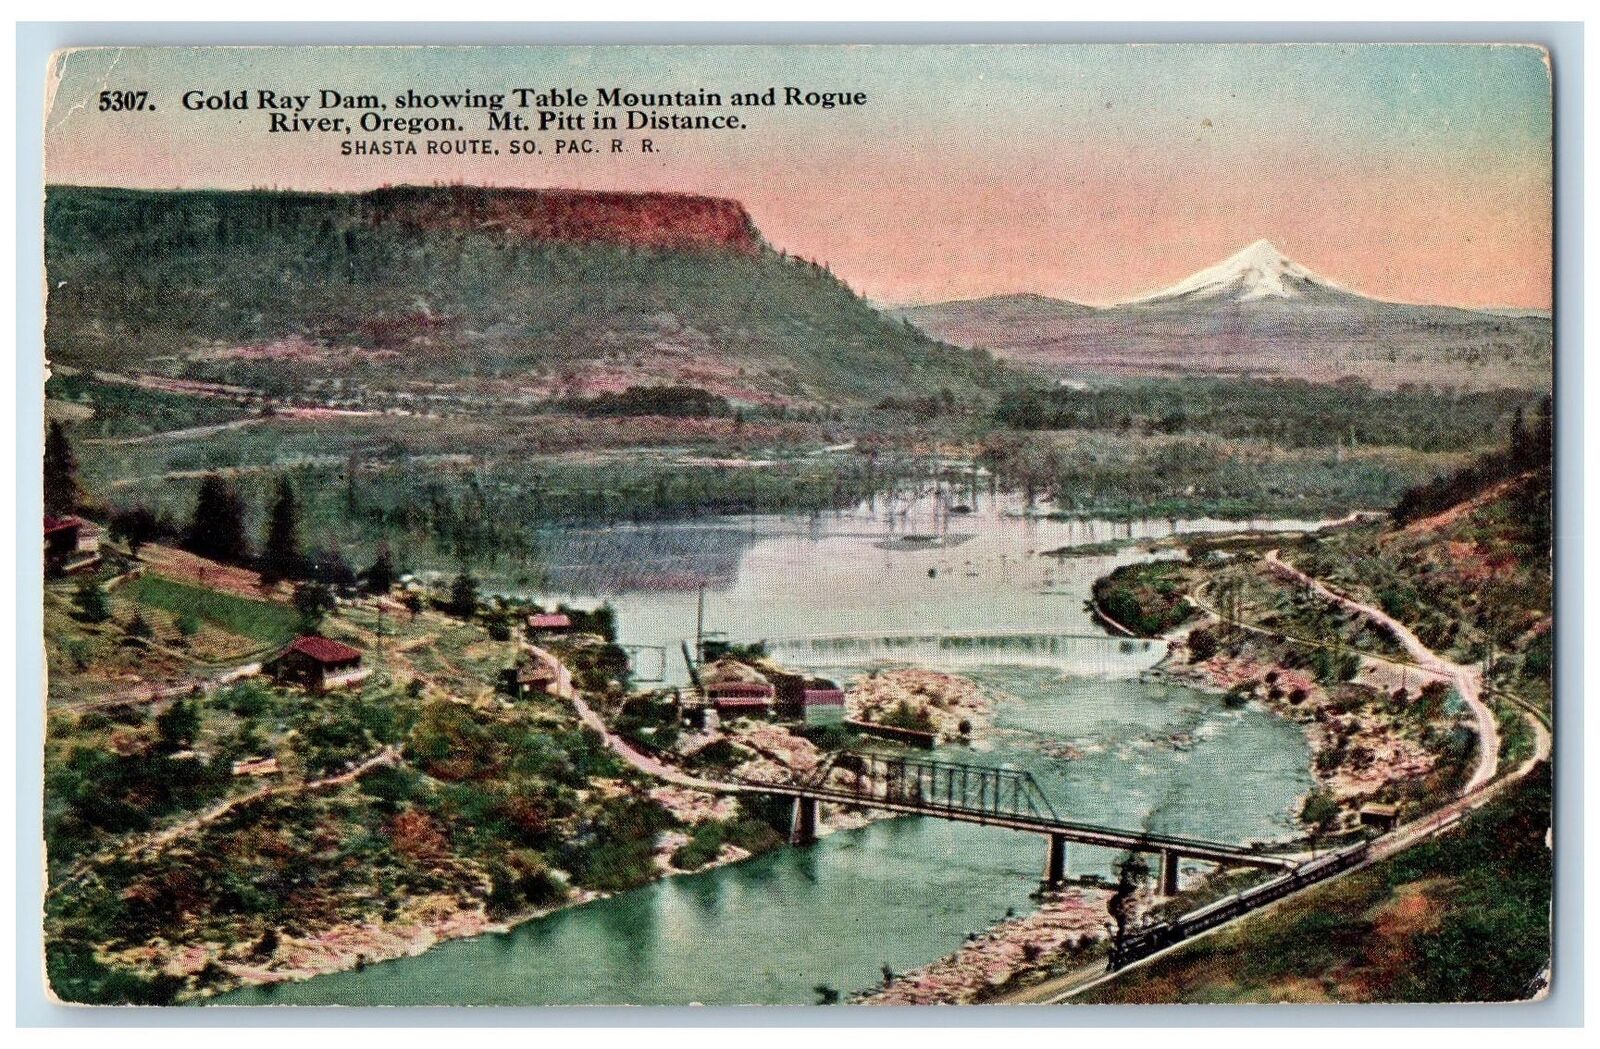 Rogue River Oregon OR Postcard Gold Ray Dam Table Mountain Shasta Rouge c1910's